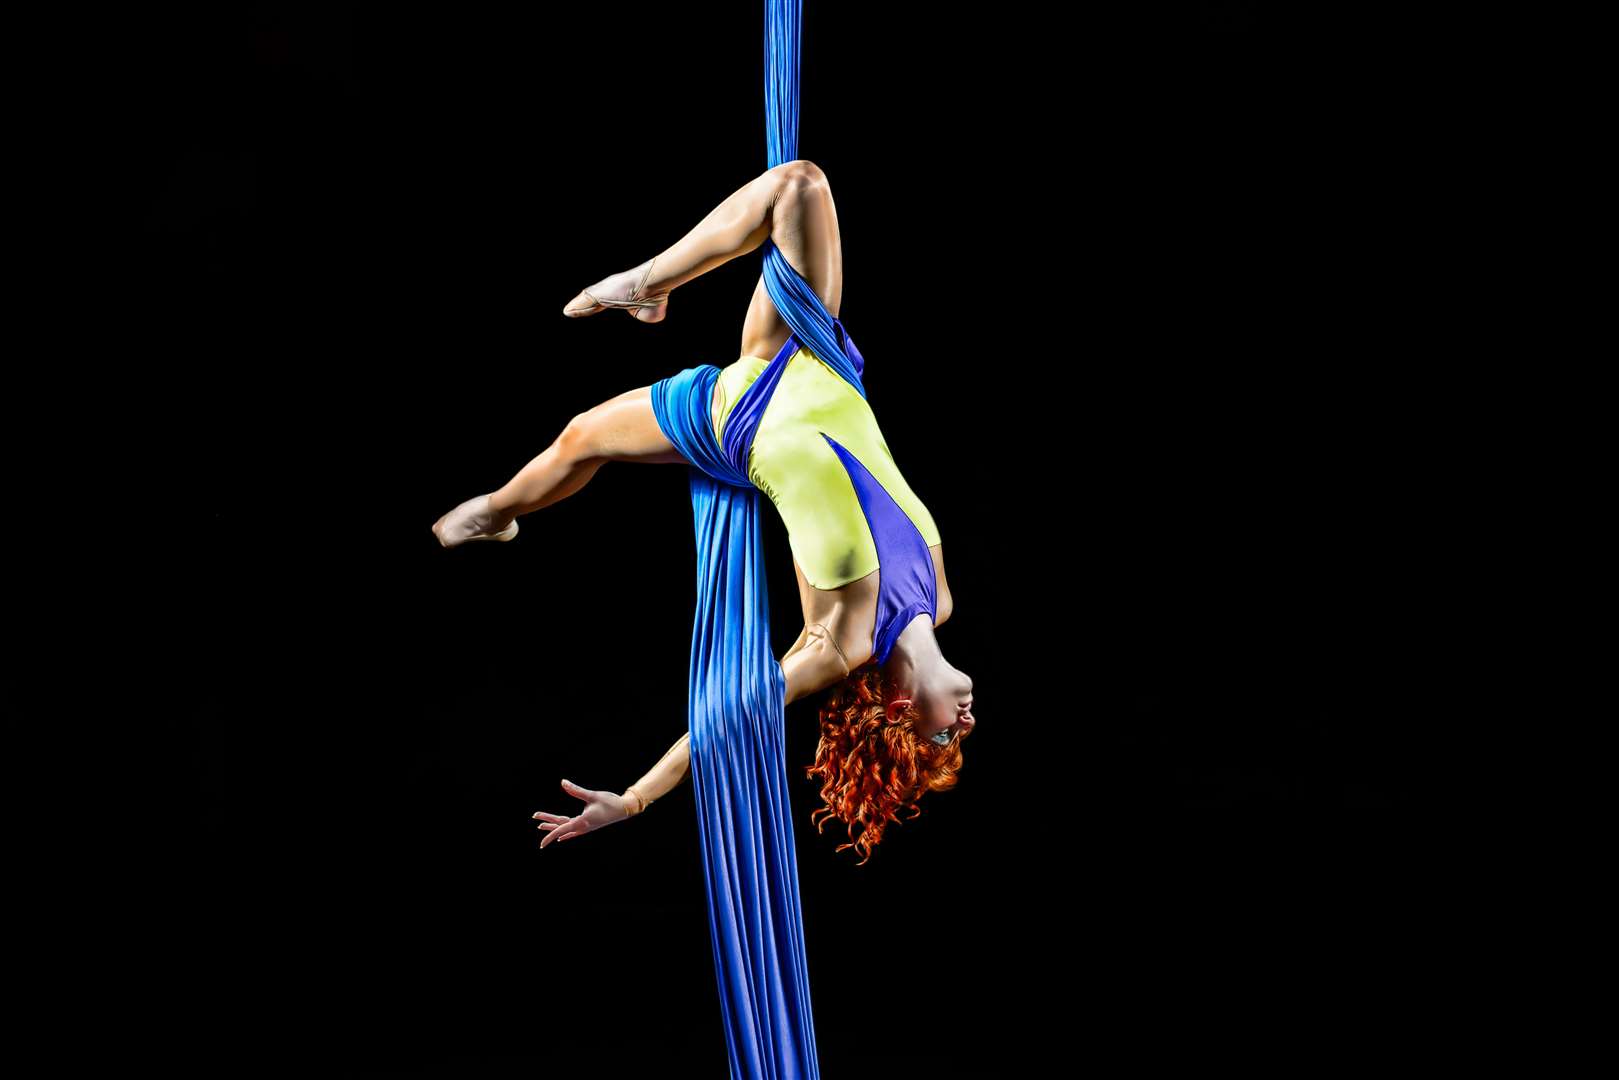 Wonderland is a love letter to Aberdeen and will feature aerial dancers,